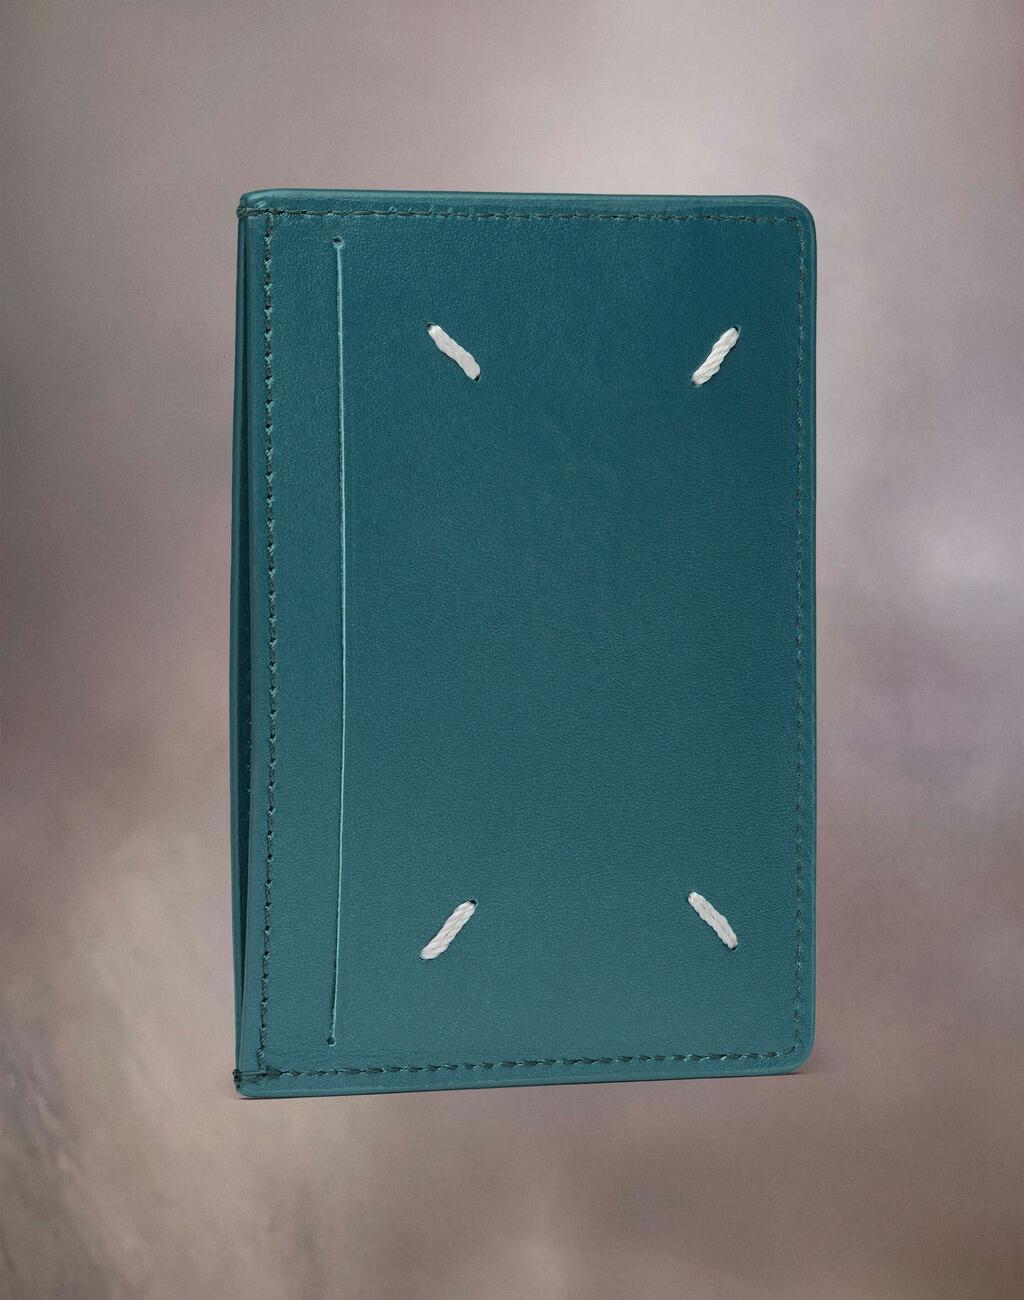 Green leather small card holder